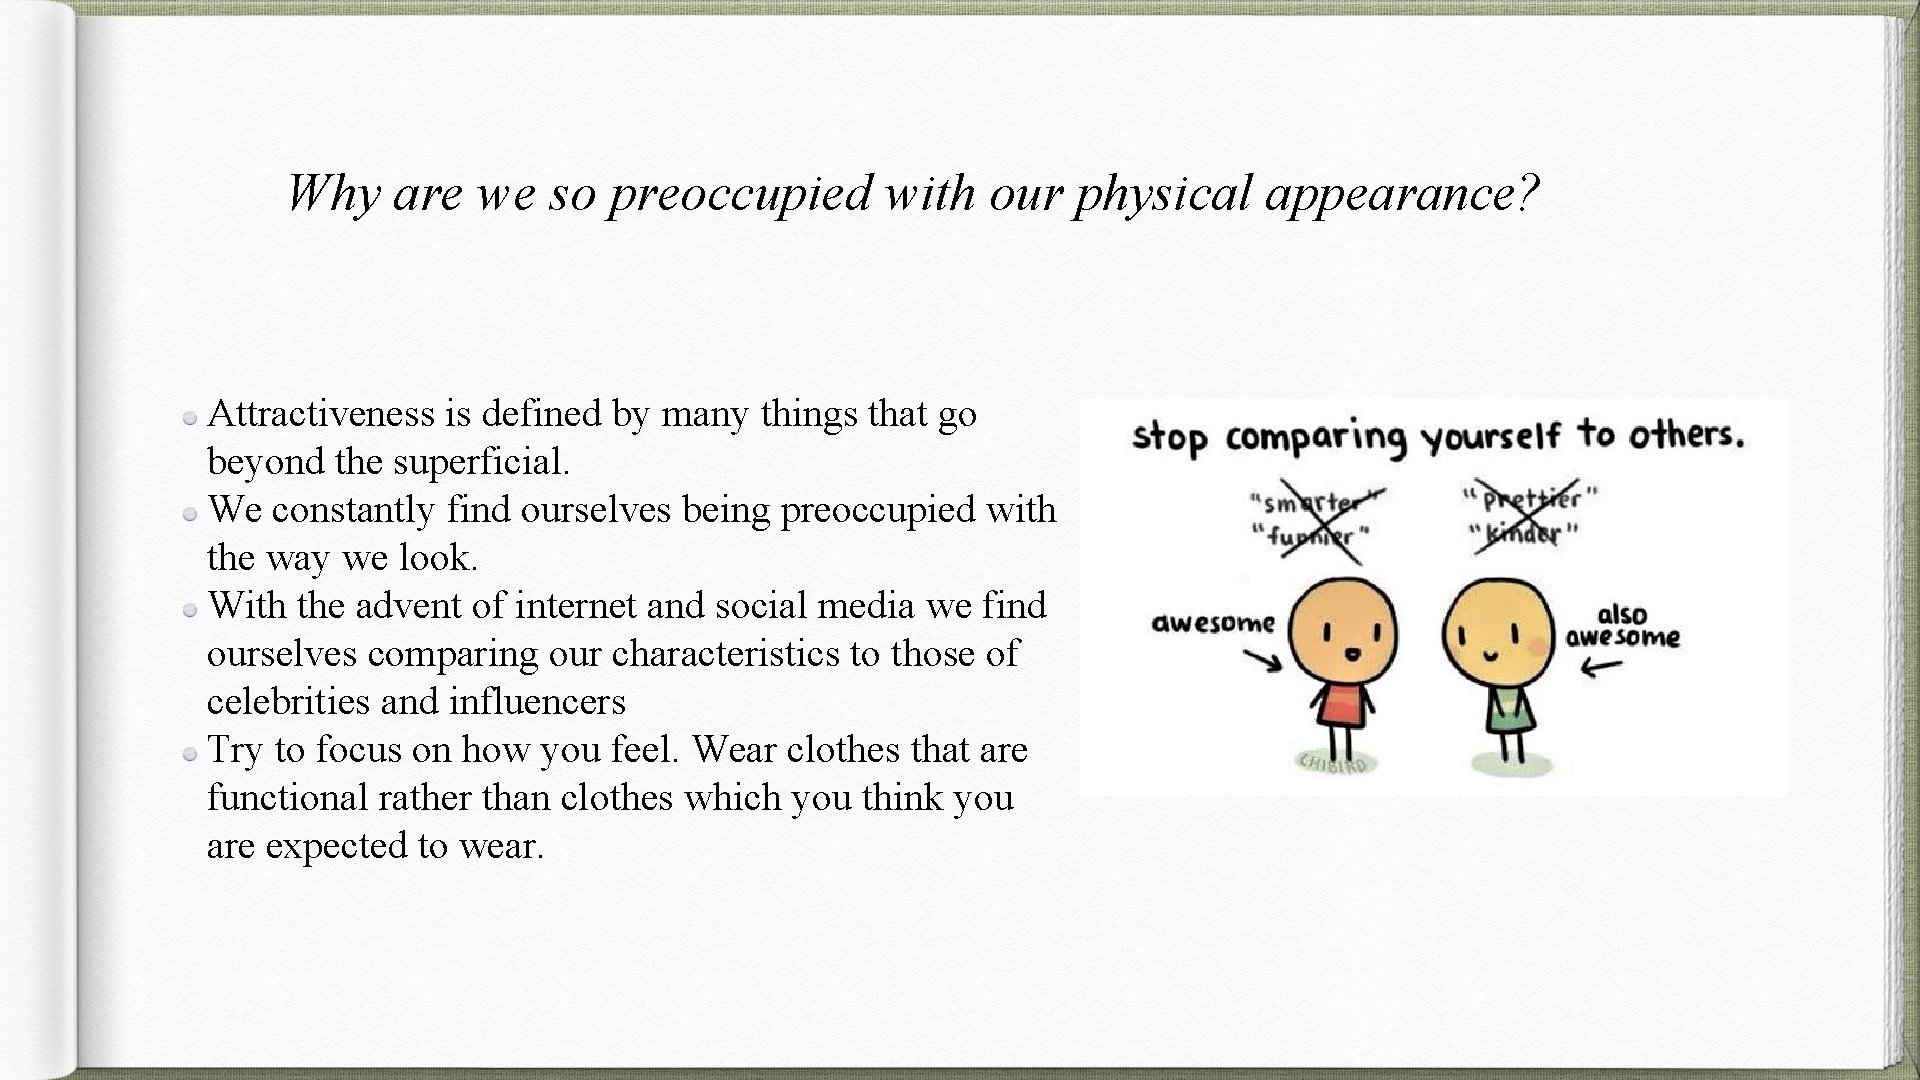 Why are we so preoccupied with our physical appearance? Attractiveness is defined by many